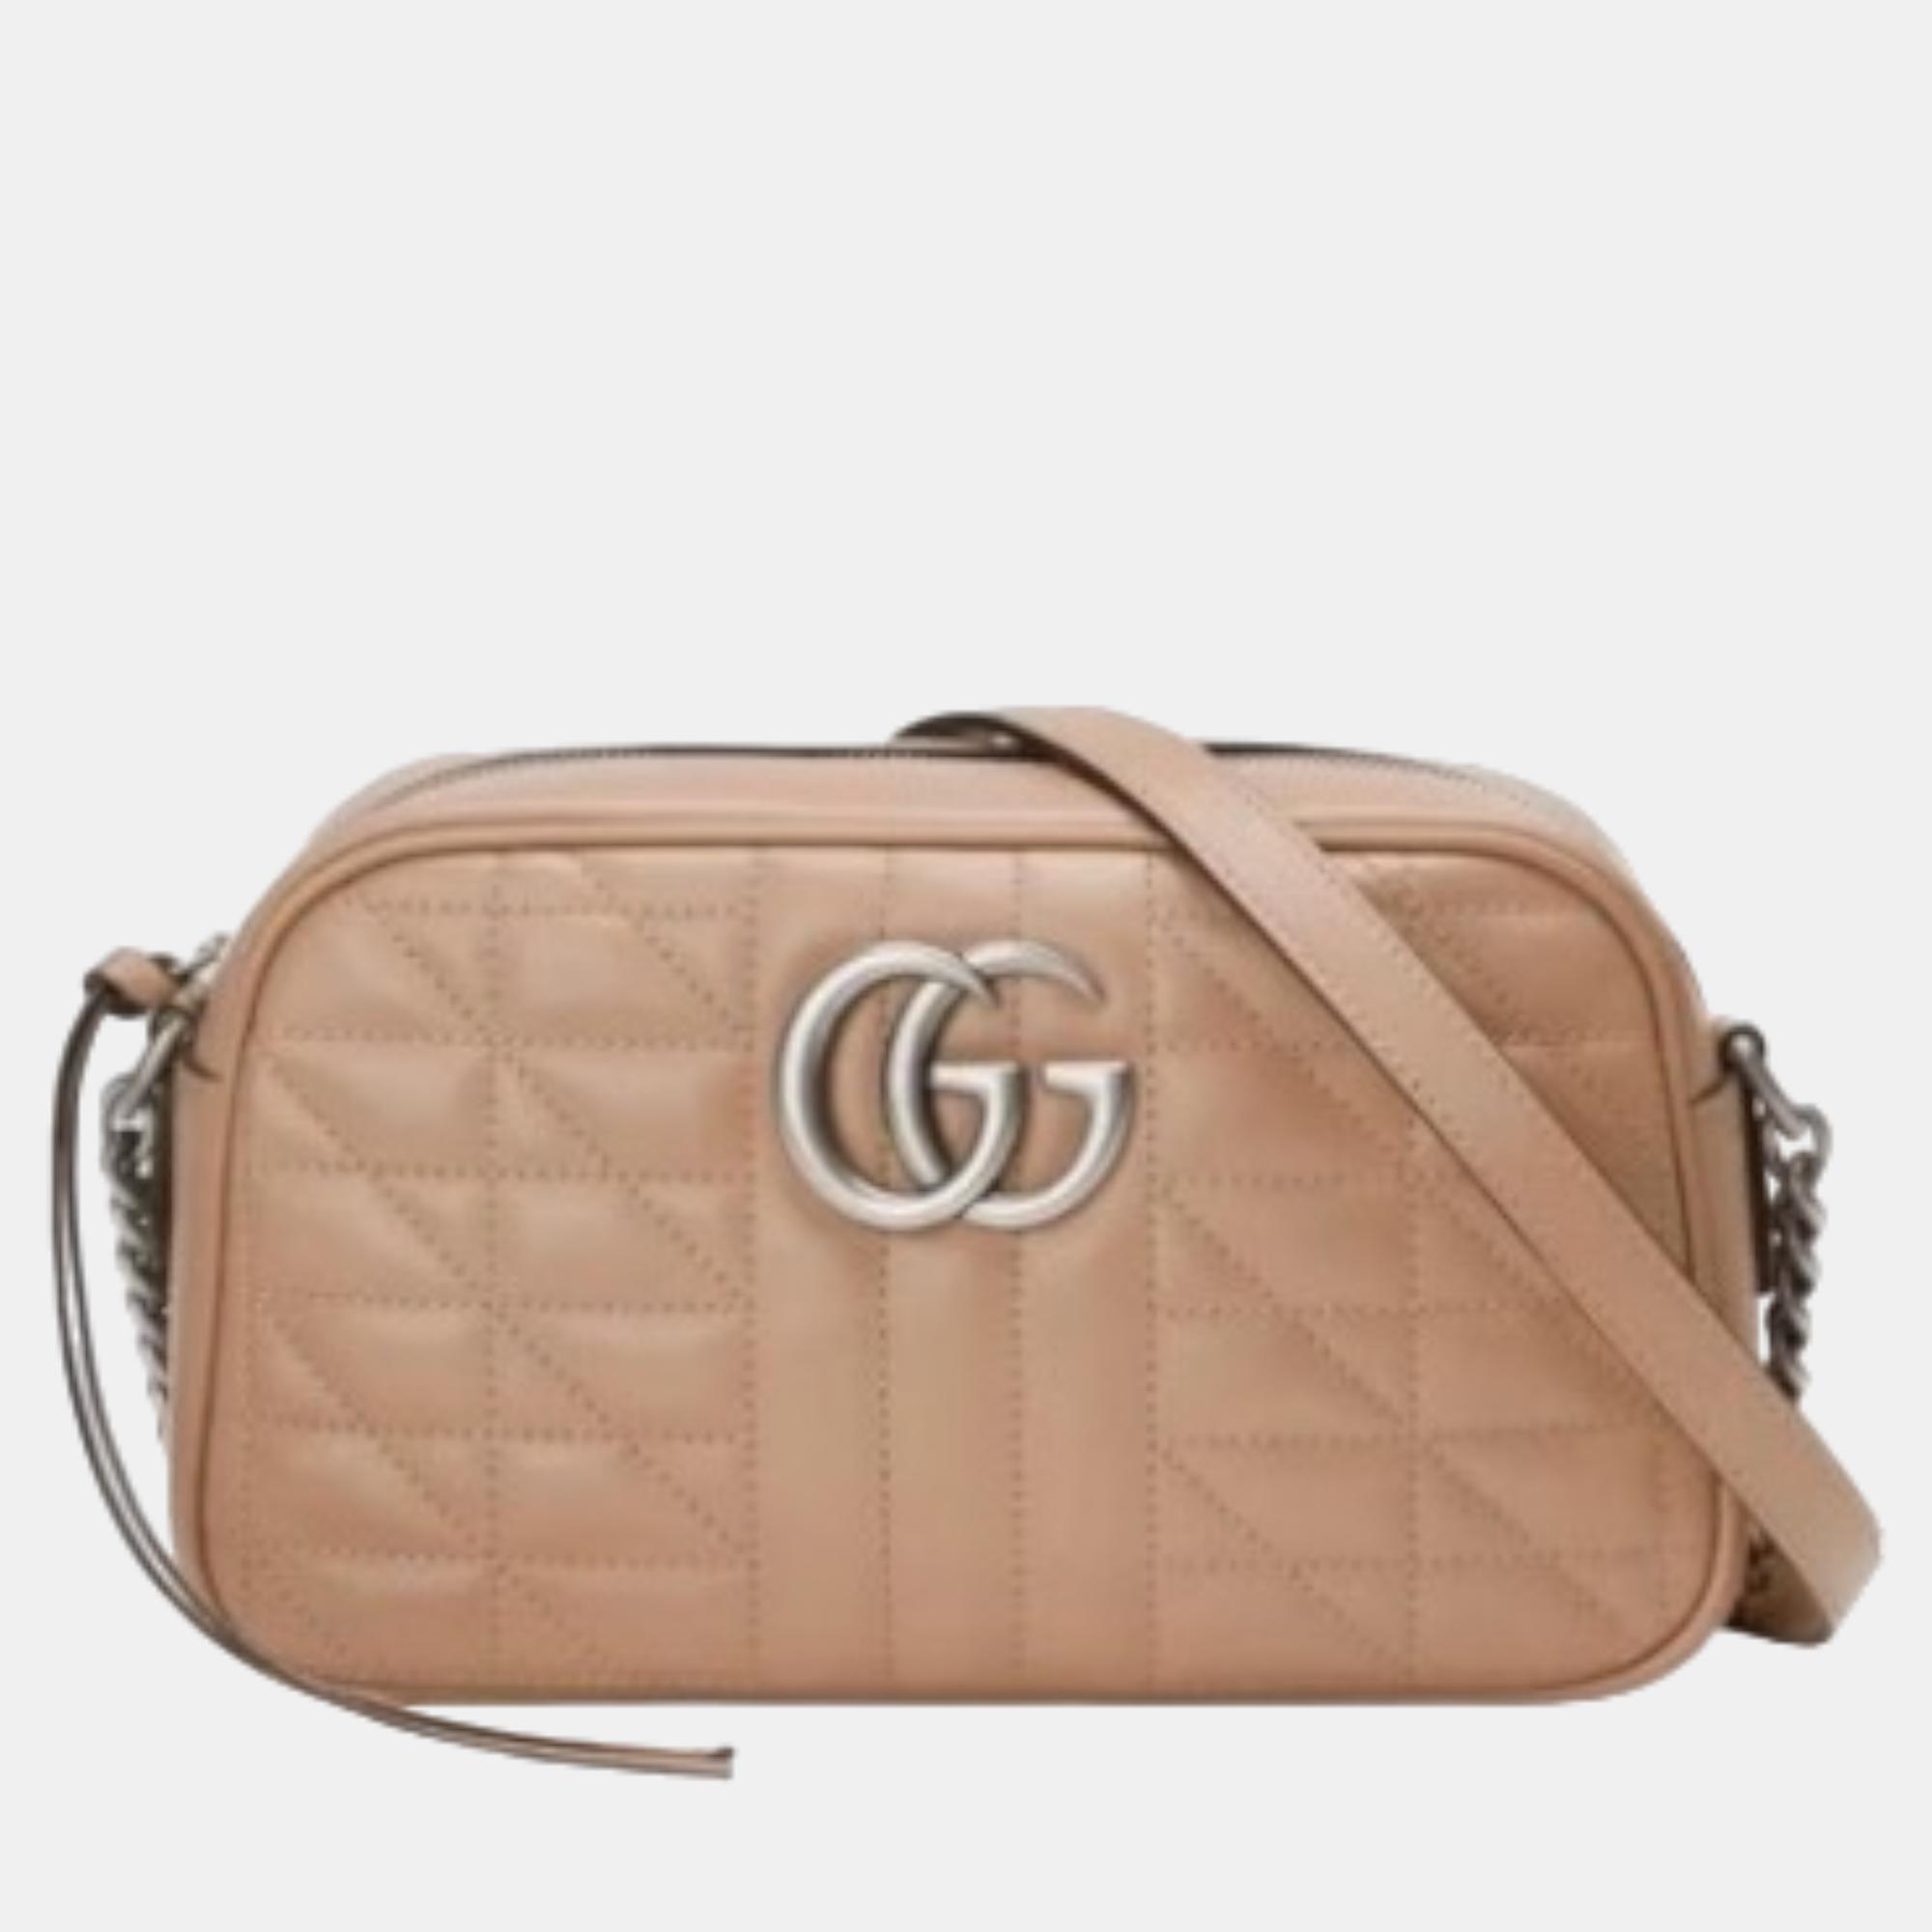 Gucci GG Marmont Mini Quilted Camera Bag Antique Silver-toned Hardware